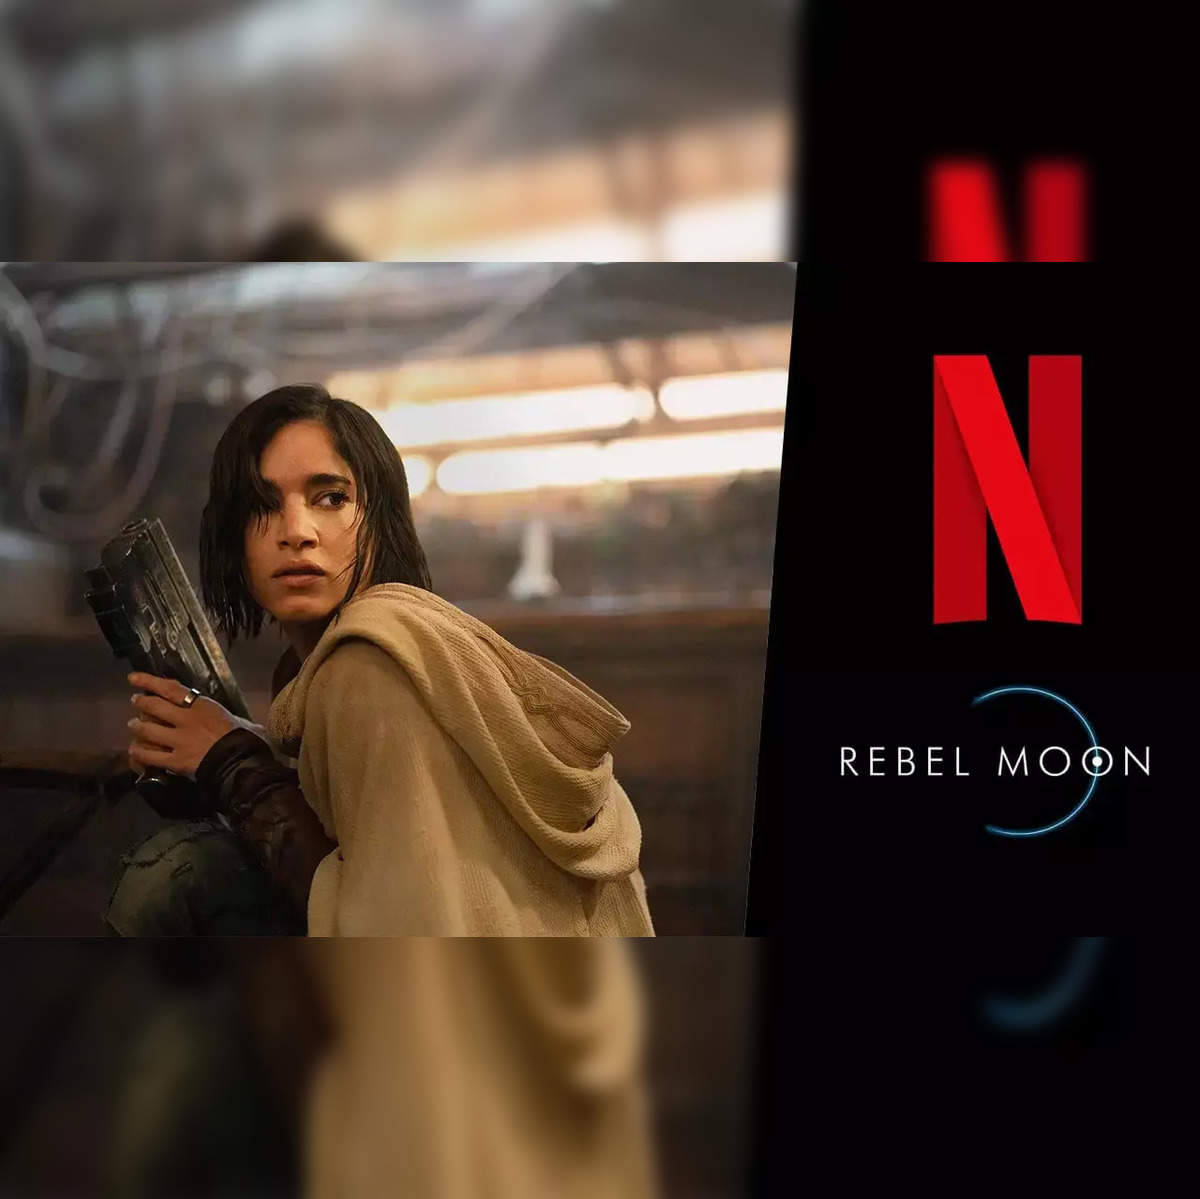 Rebel Moon release, cast plans, news, and what we've heard so far